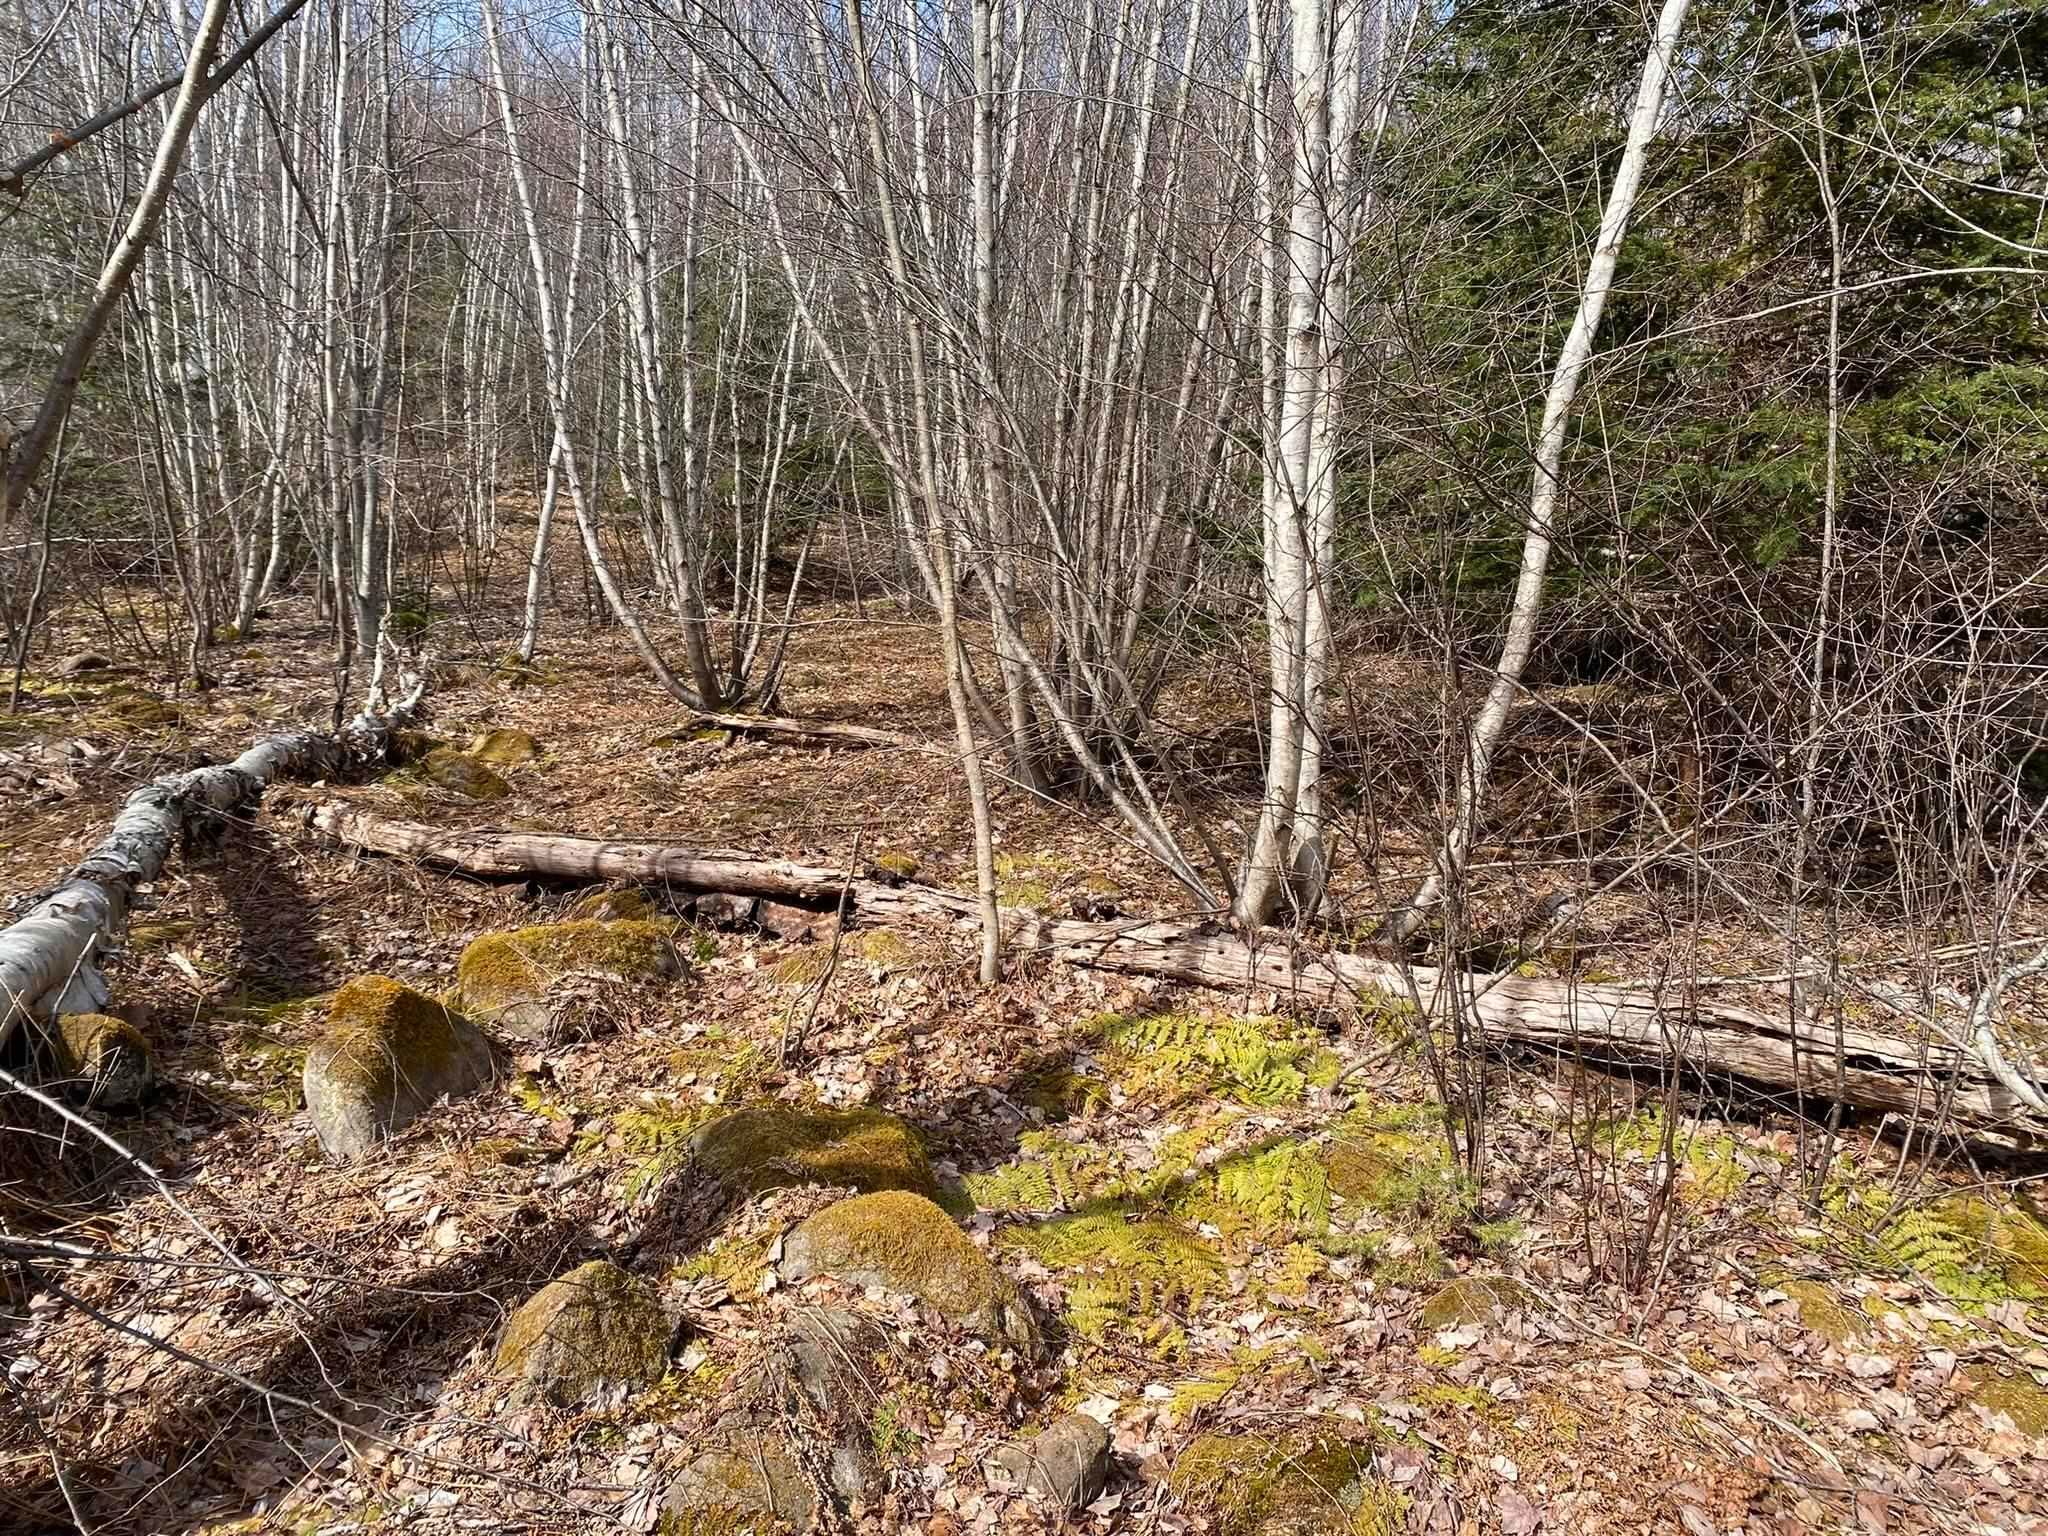 Main Photo: Lot 14 Lakeside Drive in Little Harbour: 108-Rural Pictou County Vacant Land for sale (Northern Region)  : MLS®# 202125547